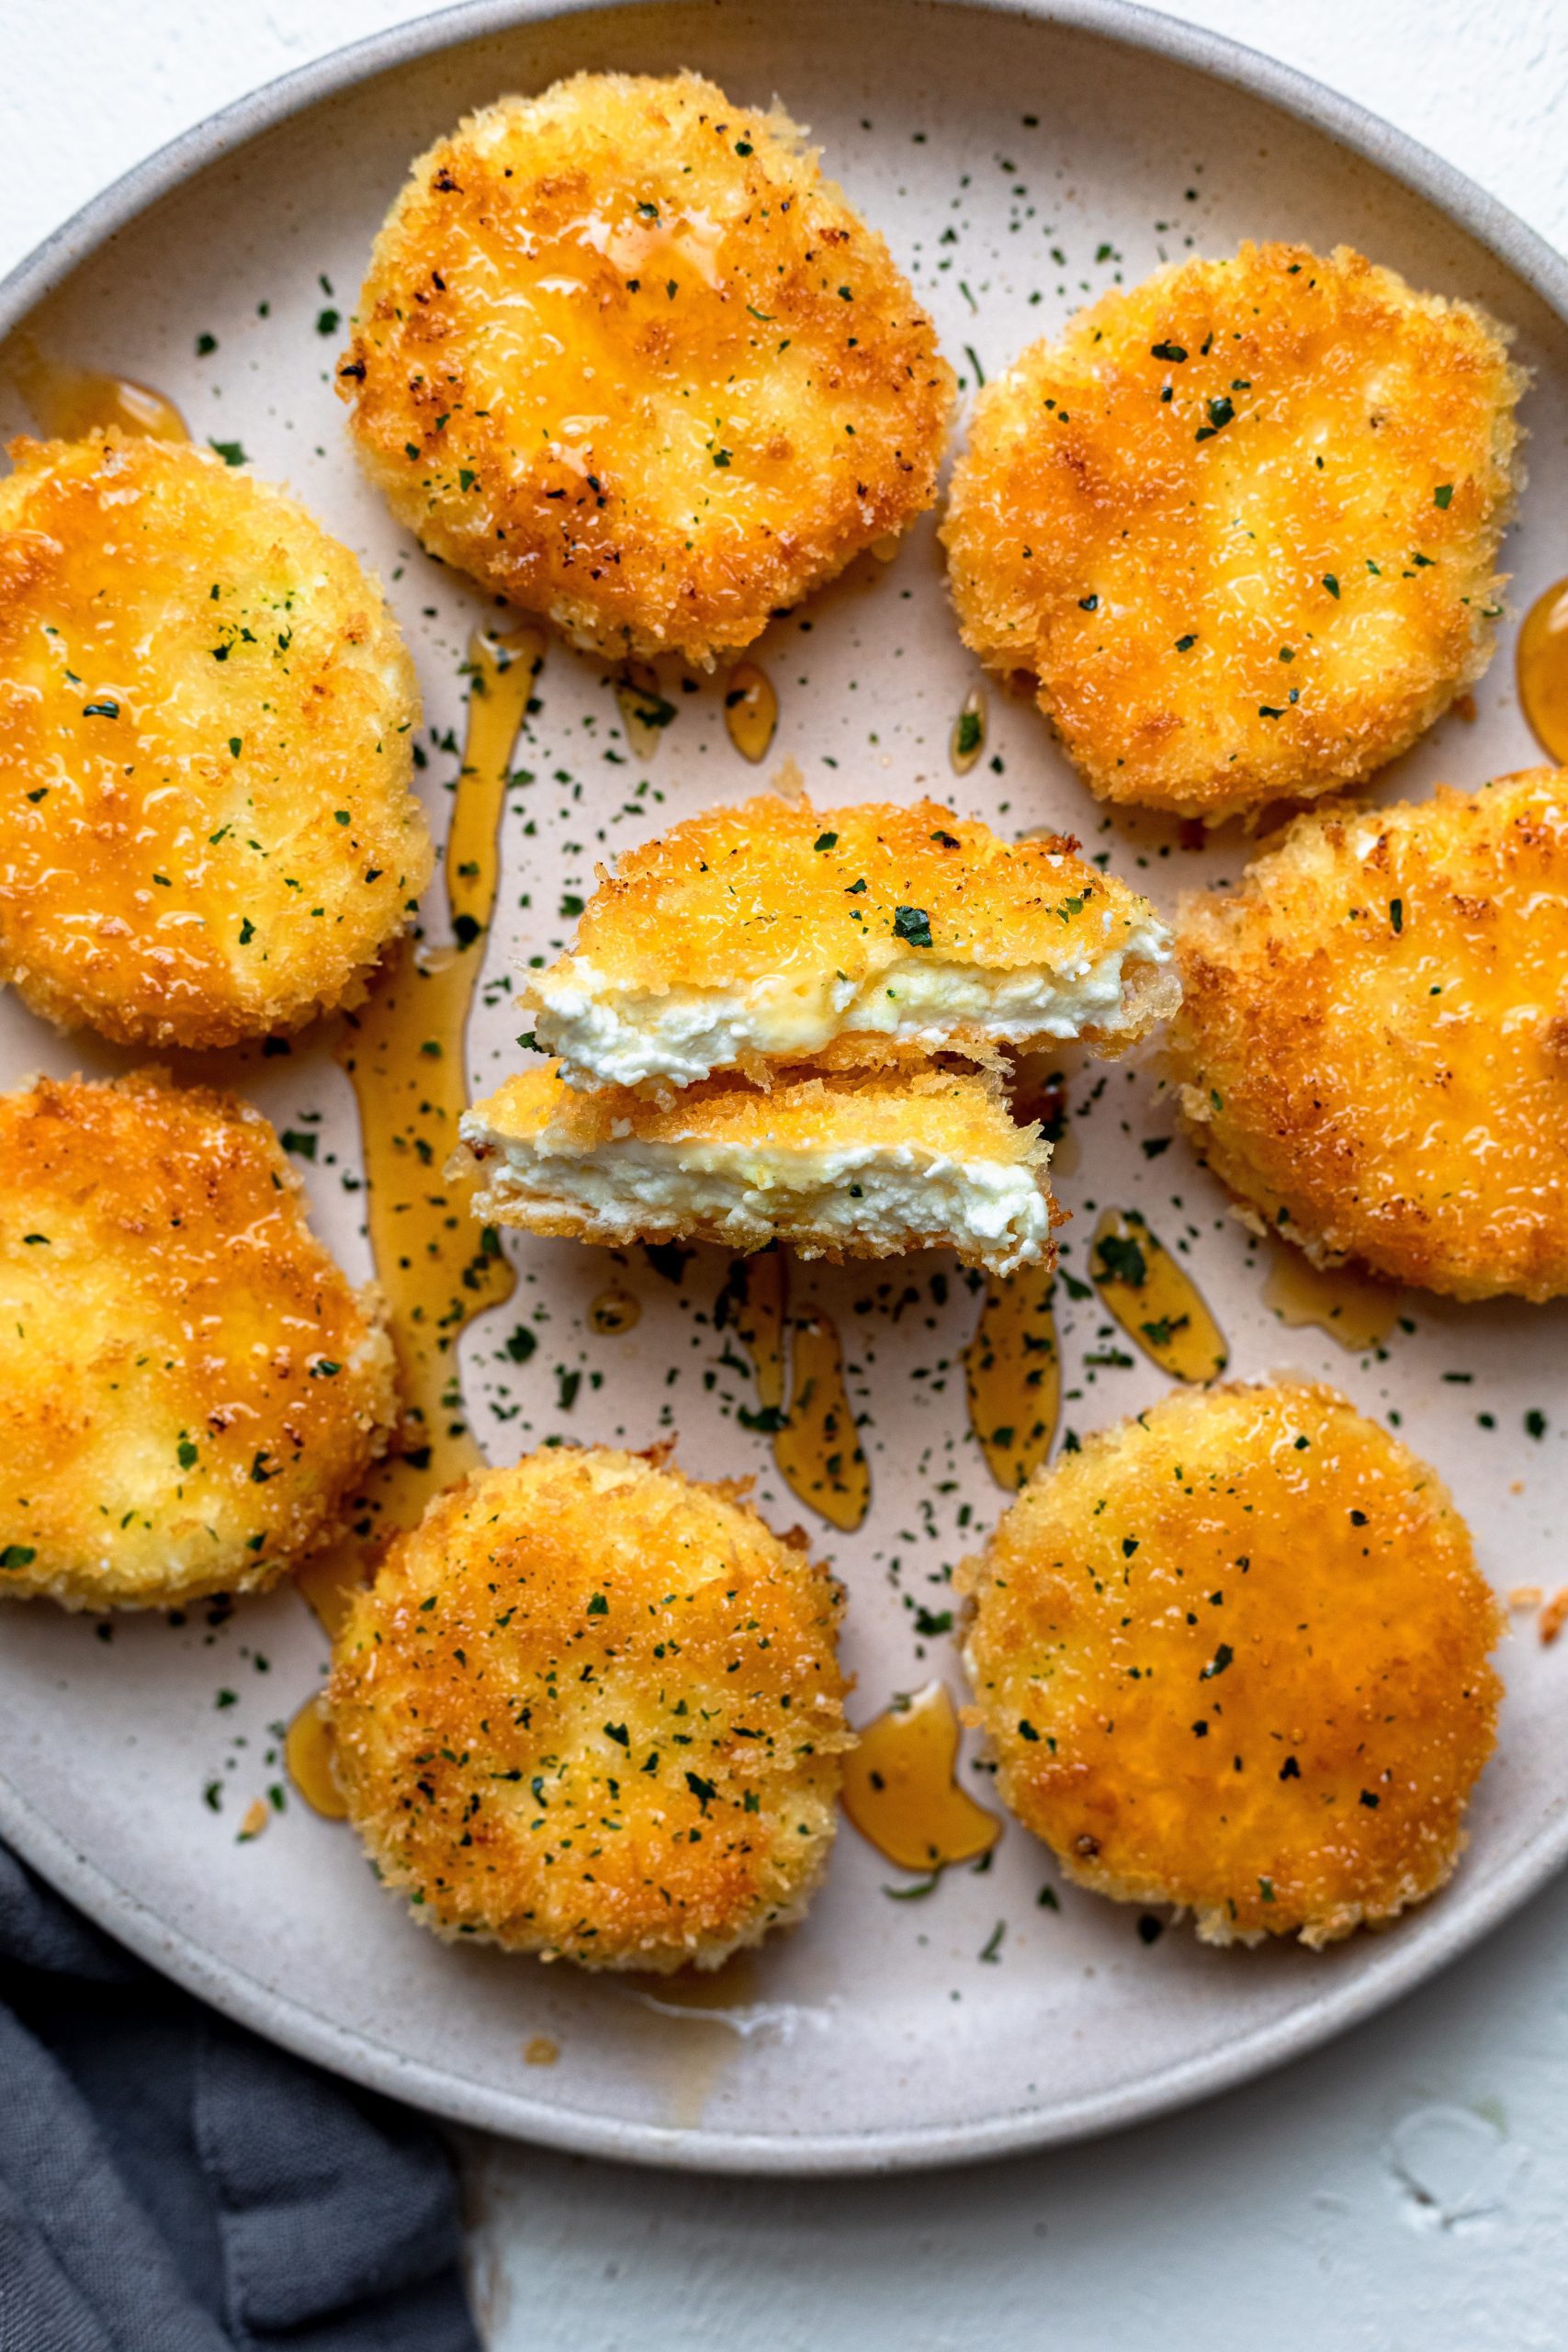 fried goat cheese